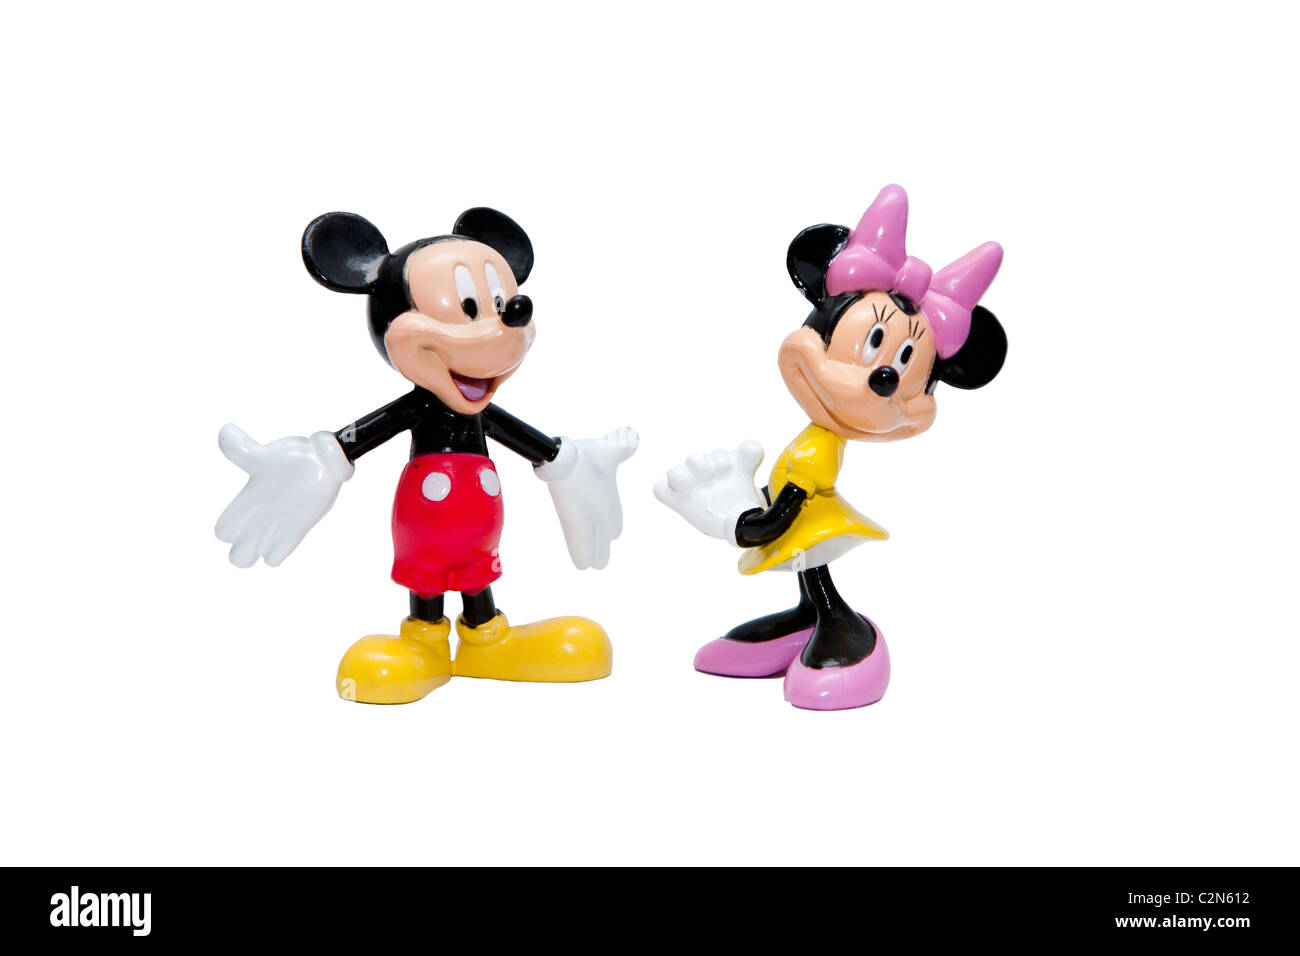 https://c8.alamy.com/comp/C2N612/micky-and-minnie-mouse-cartoon-puppets-from-walt-disney-isolated-C2N612.jpg